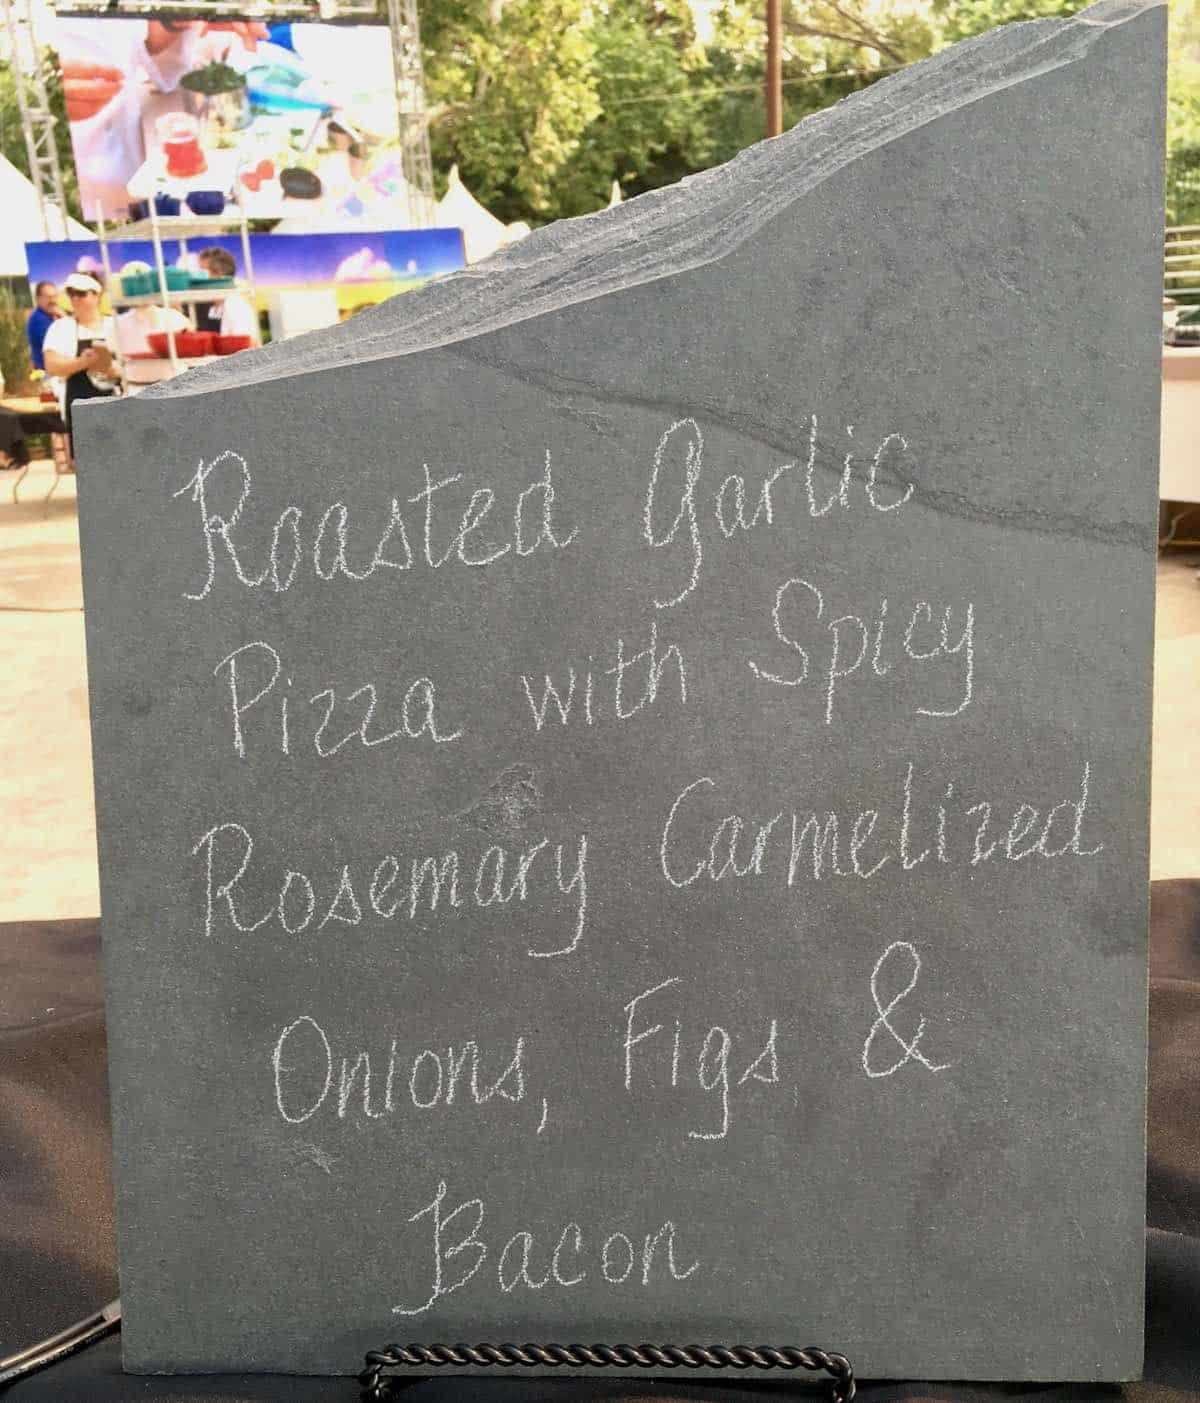 a day in the life of a cook-off contestant shows a sign of her recipe roasted garlic pizza with spicy rosemary carmelized onions, figs and bacon